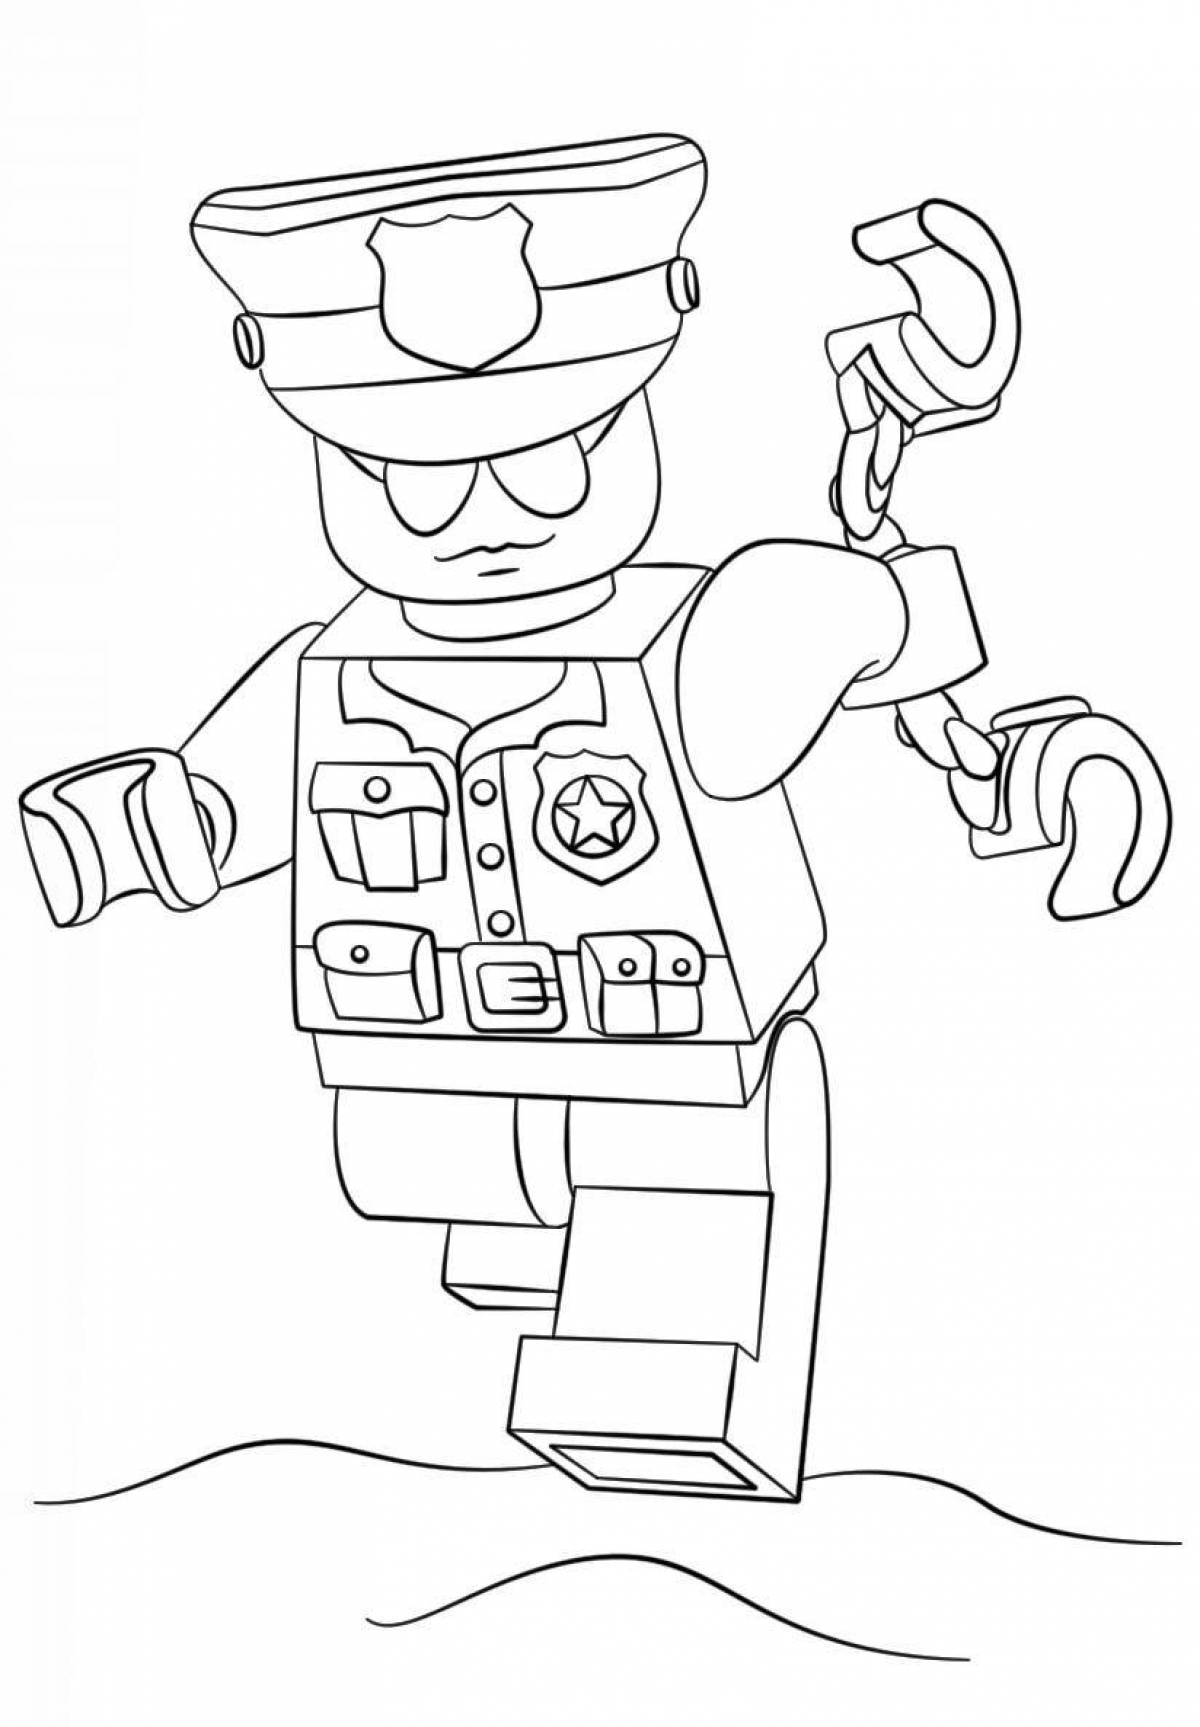 Busy lego city coloring page